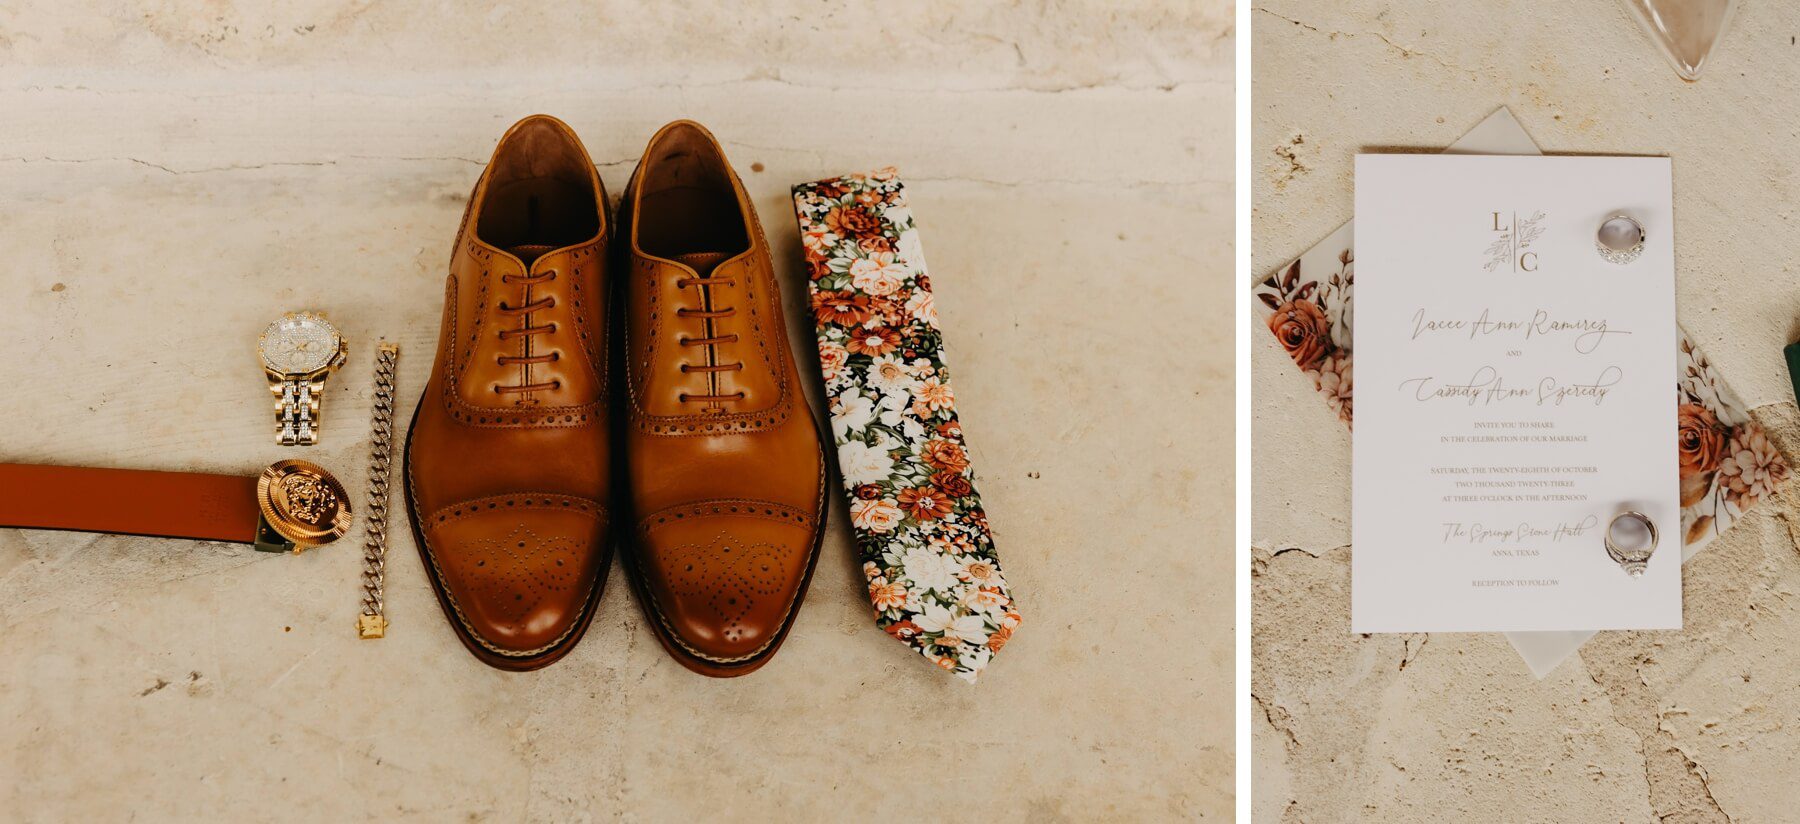 Brown dress shoes with floral tie and accessories and boho floral wedding invitation 